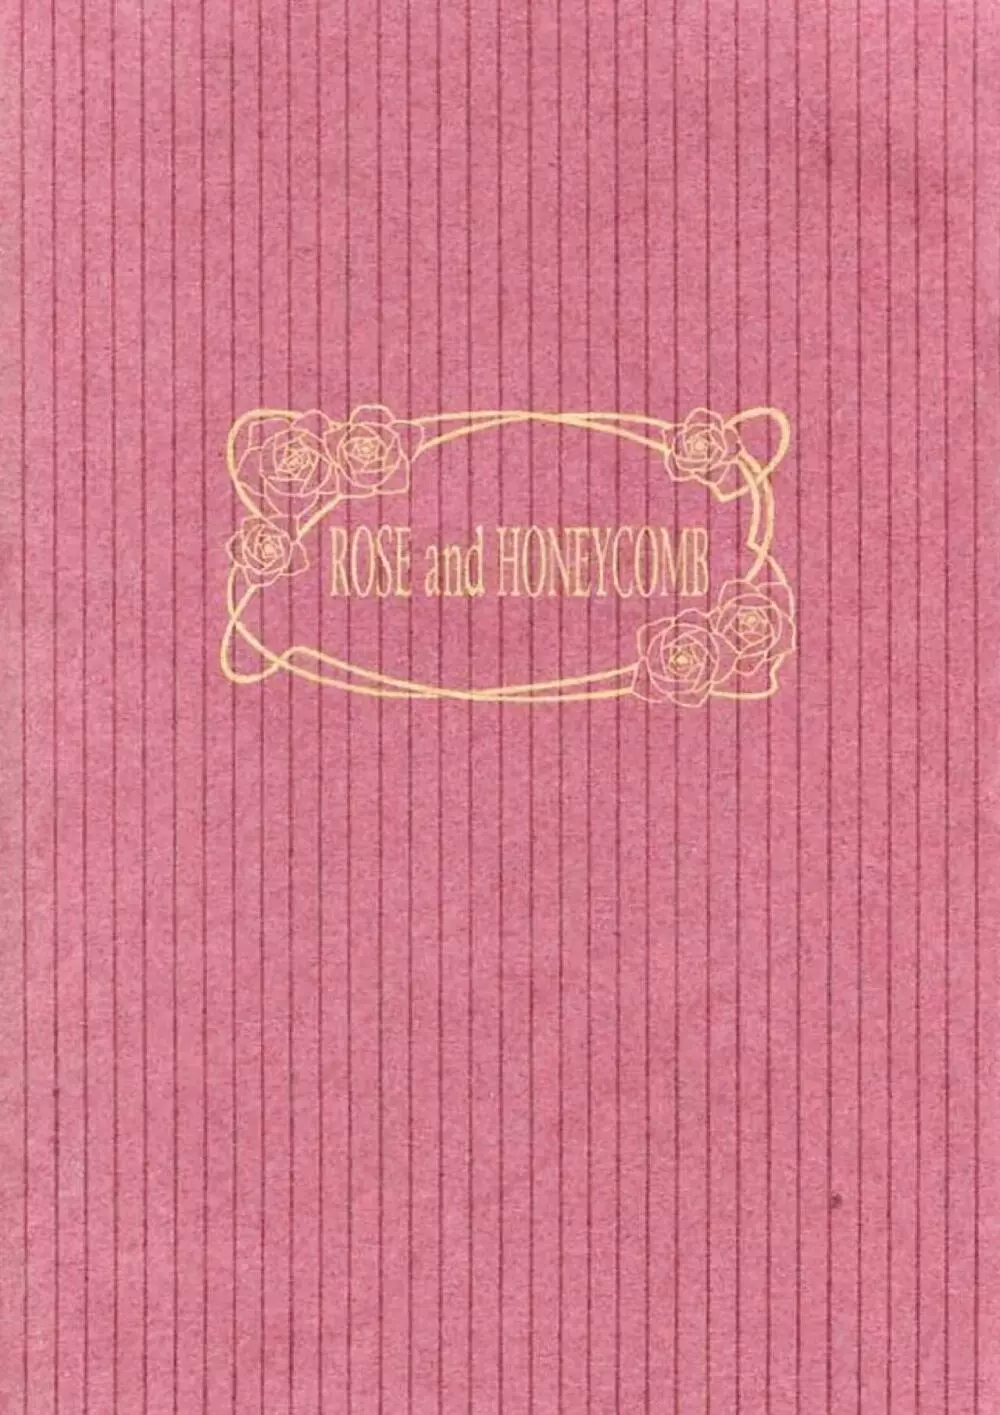 ROSE and HONEYCOMB 38ページ